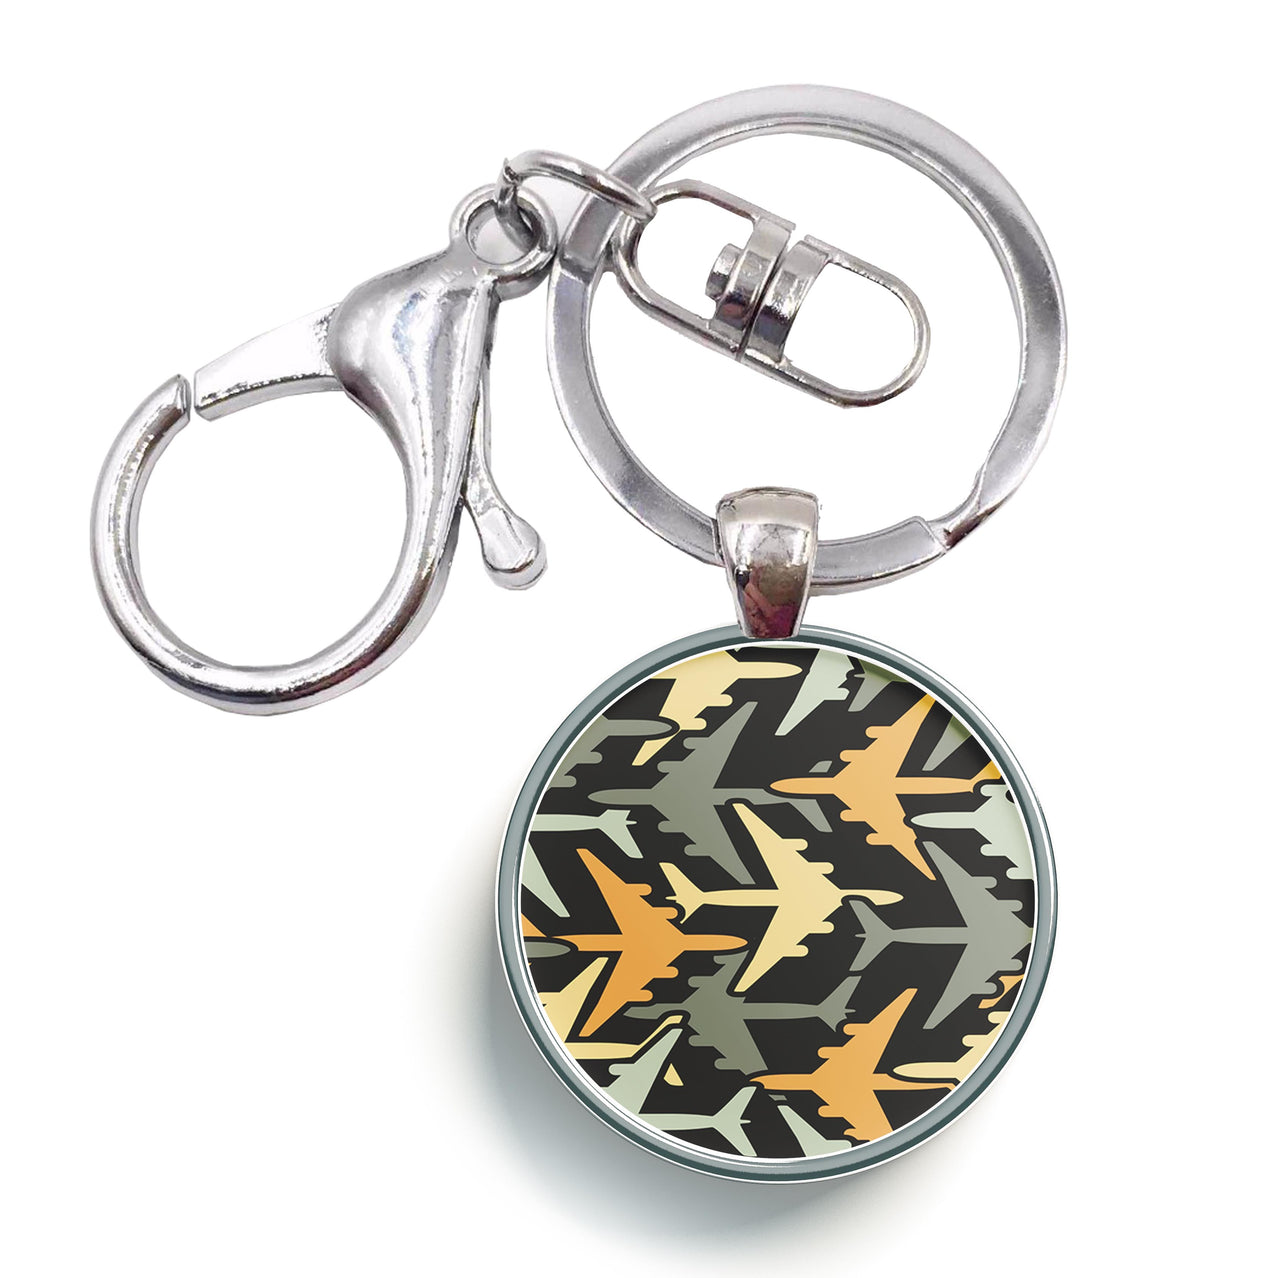 Volume 2 Super Colourful Airplanes Designed Circle Key Chains